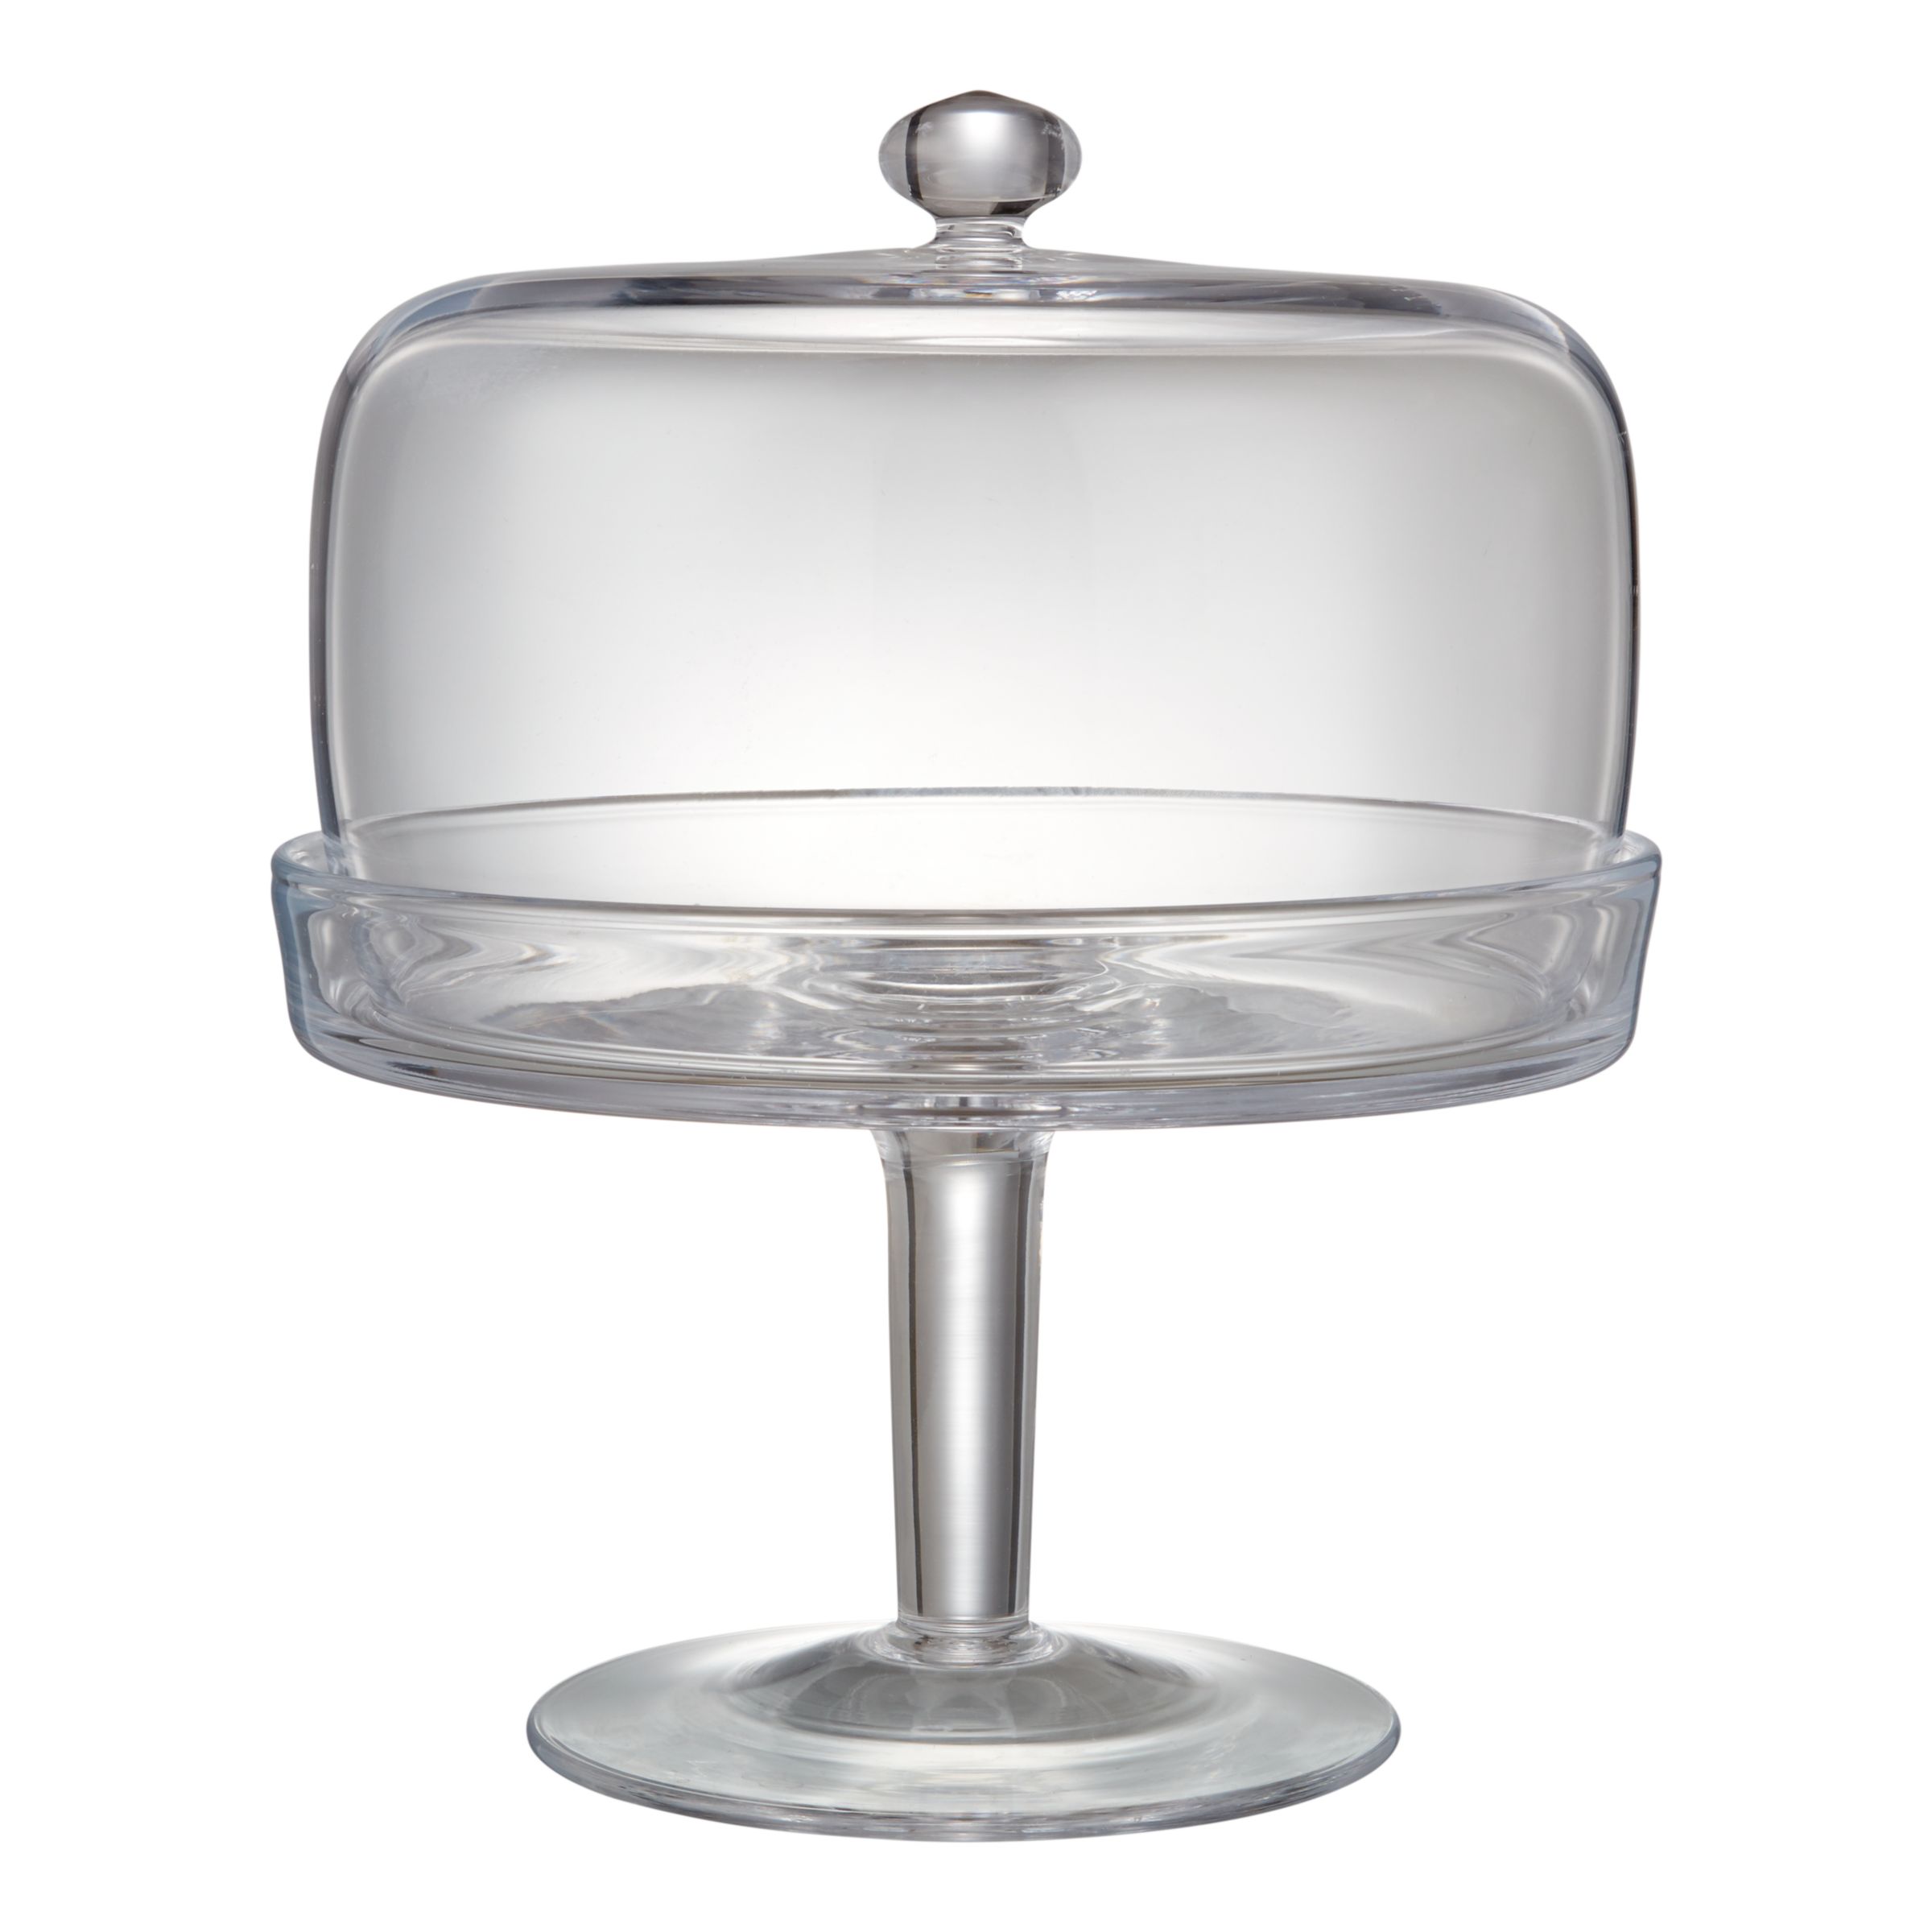  John  Lewis  Partners Serve Glass Cake  Stand  and Dome 20 